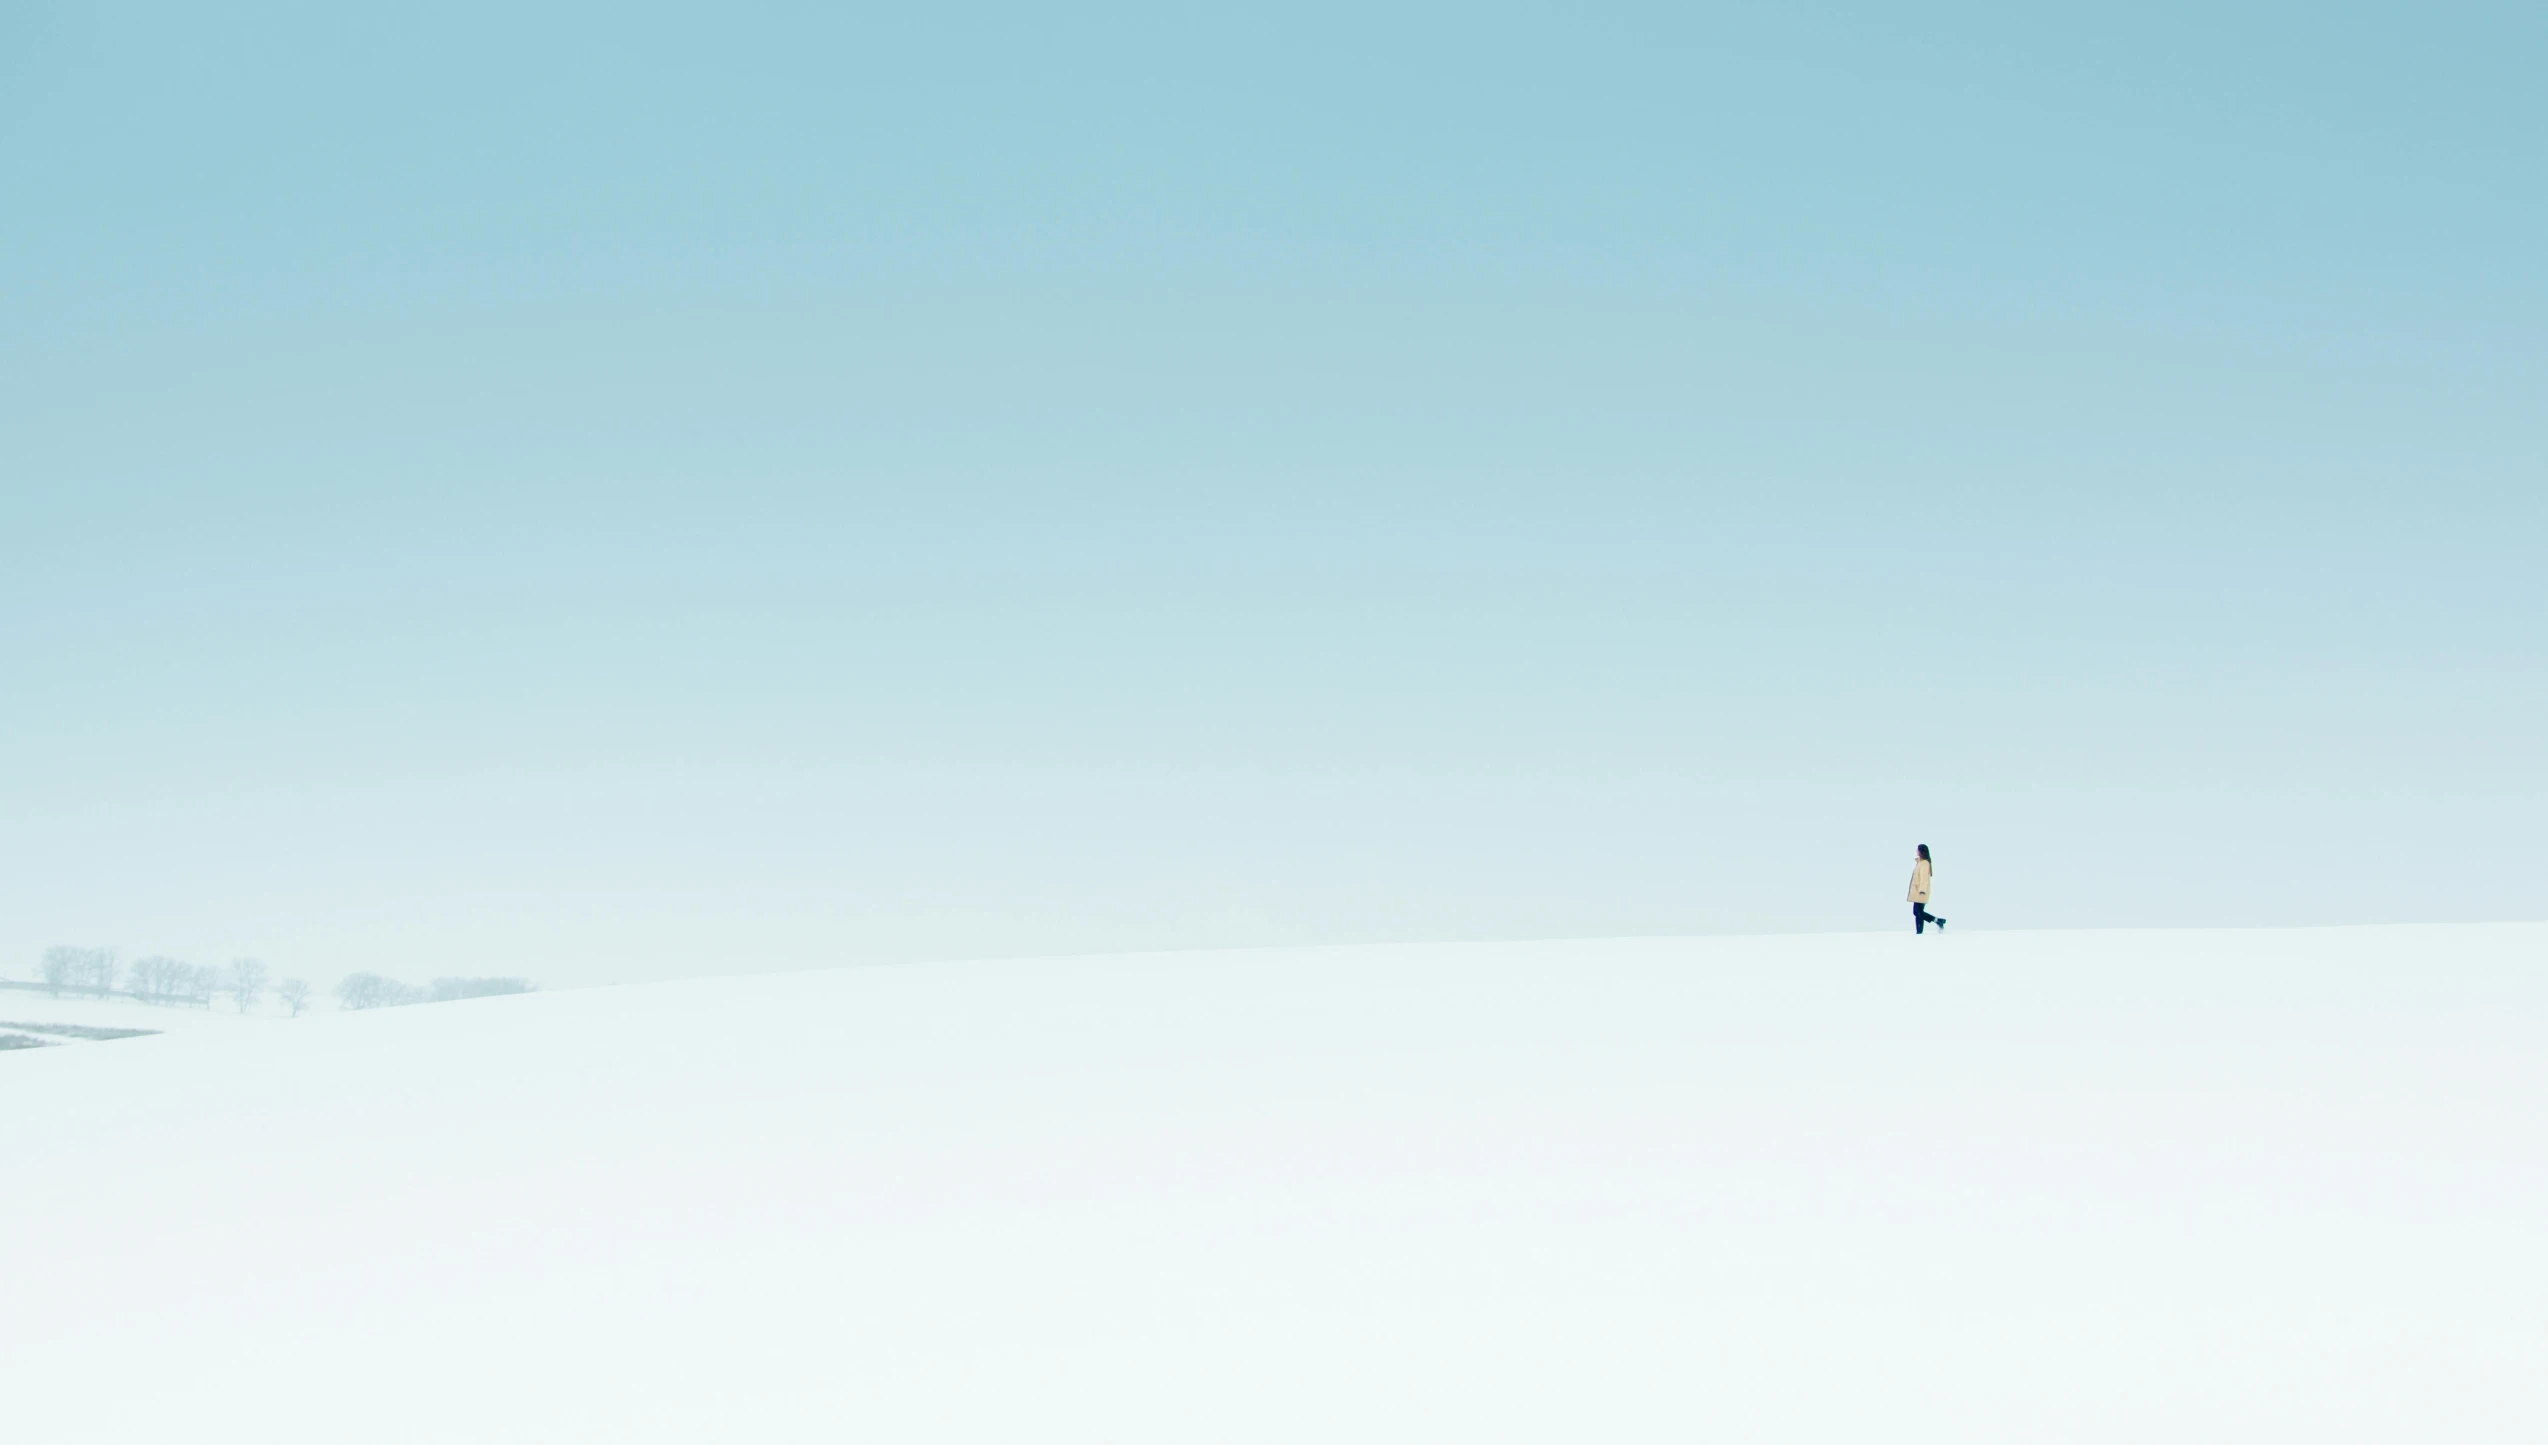 a person walking across a snow covered field, by Matthias Weischer, minimalism, light-blue, computer wallpaper, curiosity, minimalissimo